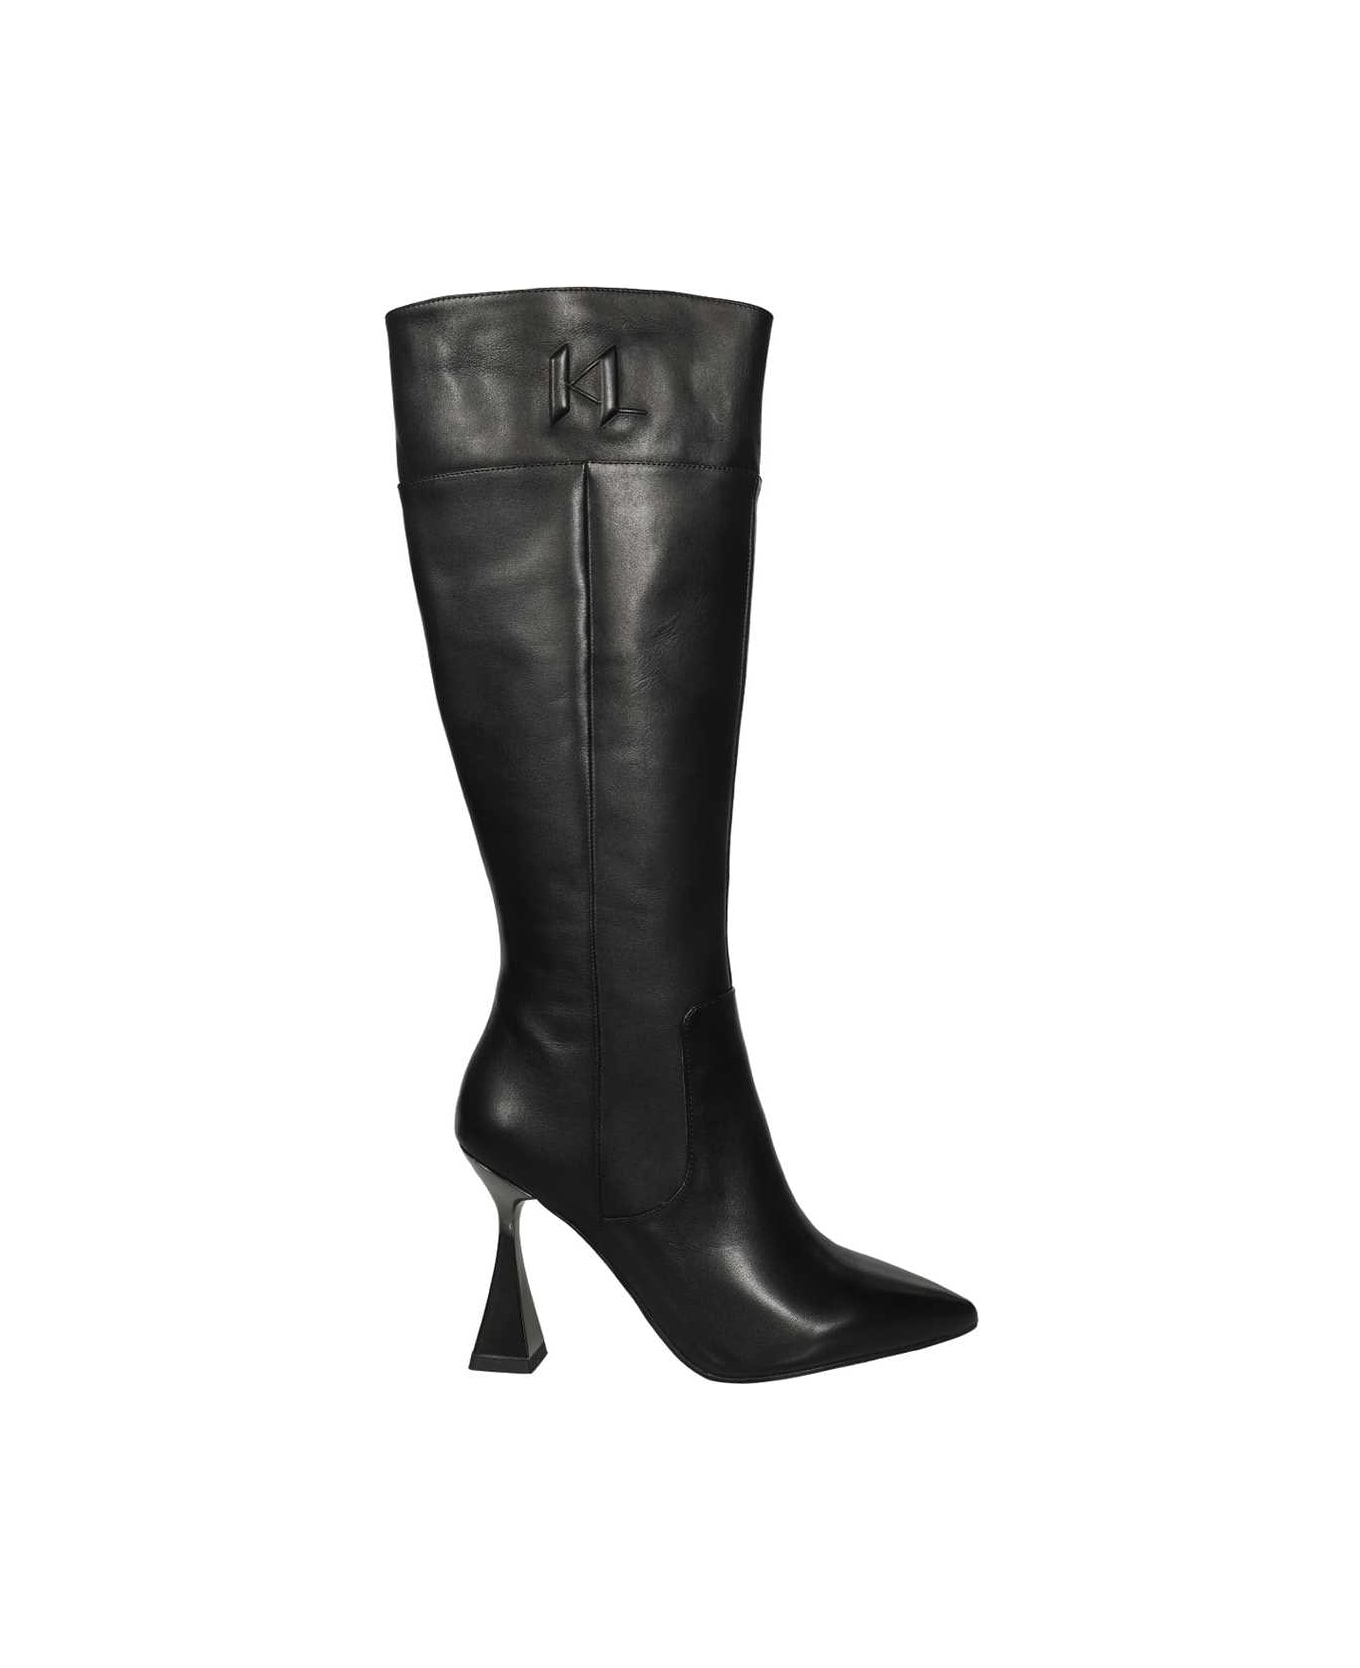 Karl Lagerfeld Leather Boots - black